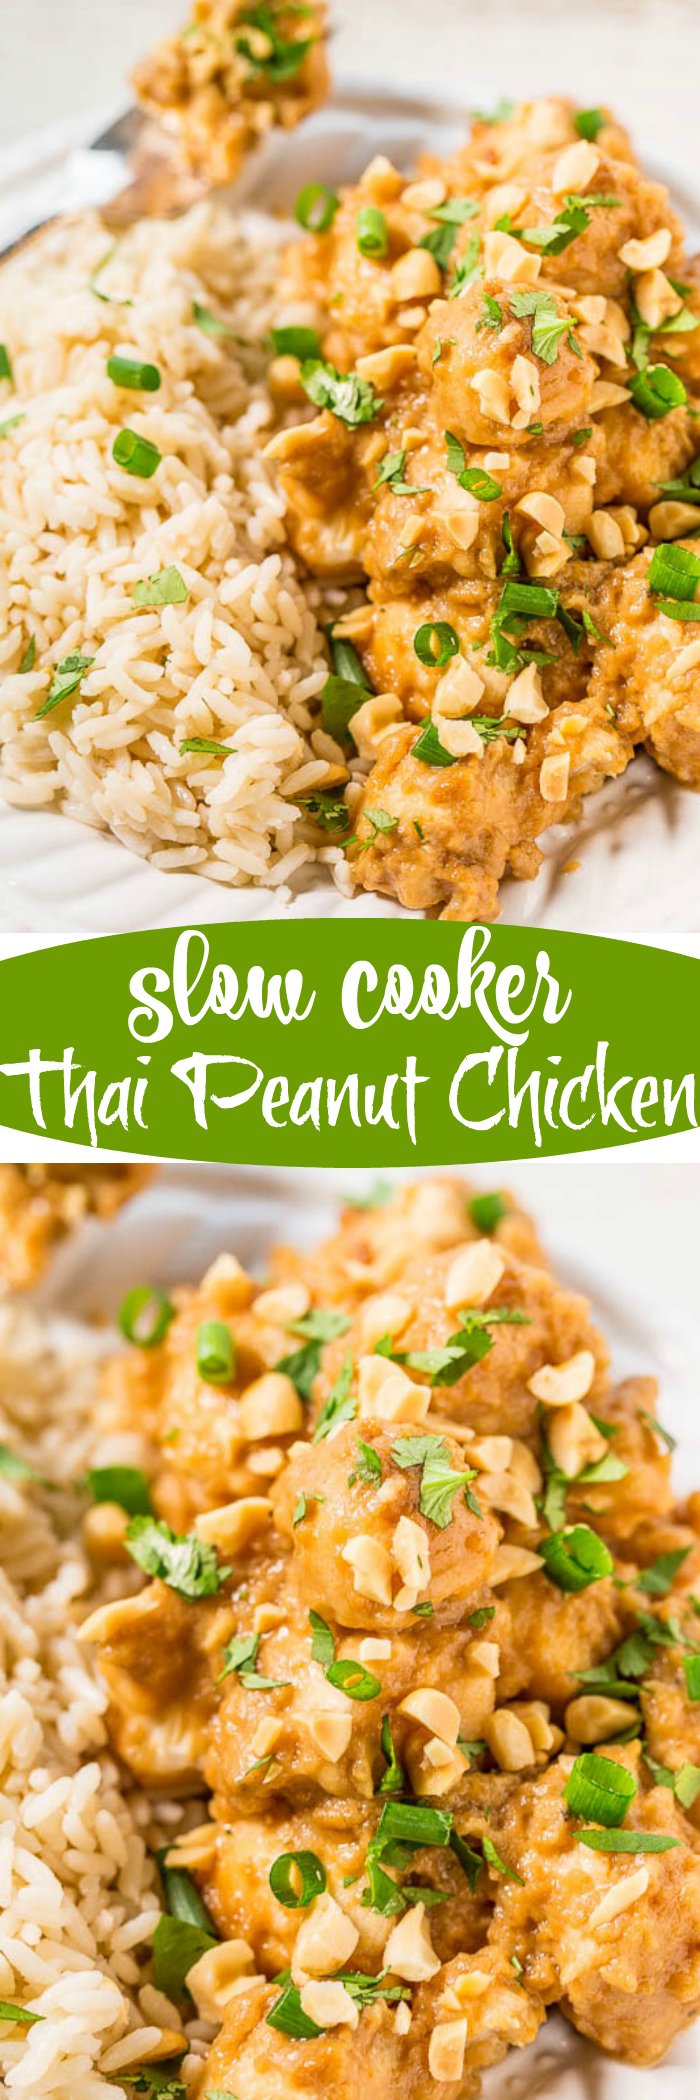 Slow Cooker Thai Peanut Chicken - The easiest peanut chicken ever and your slow cooker does all the work!! Topped with crunchy peanuts, cilantro, green onions, and the peanut sauce is irresistible!!